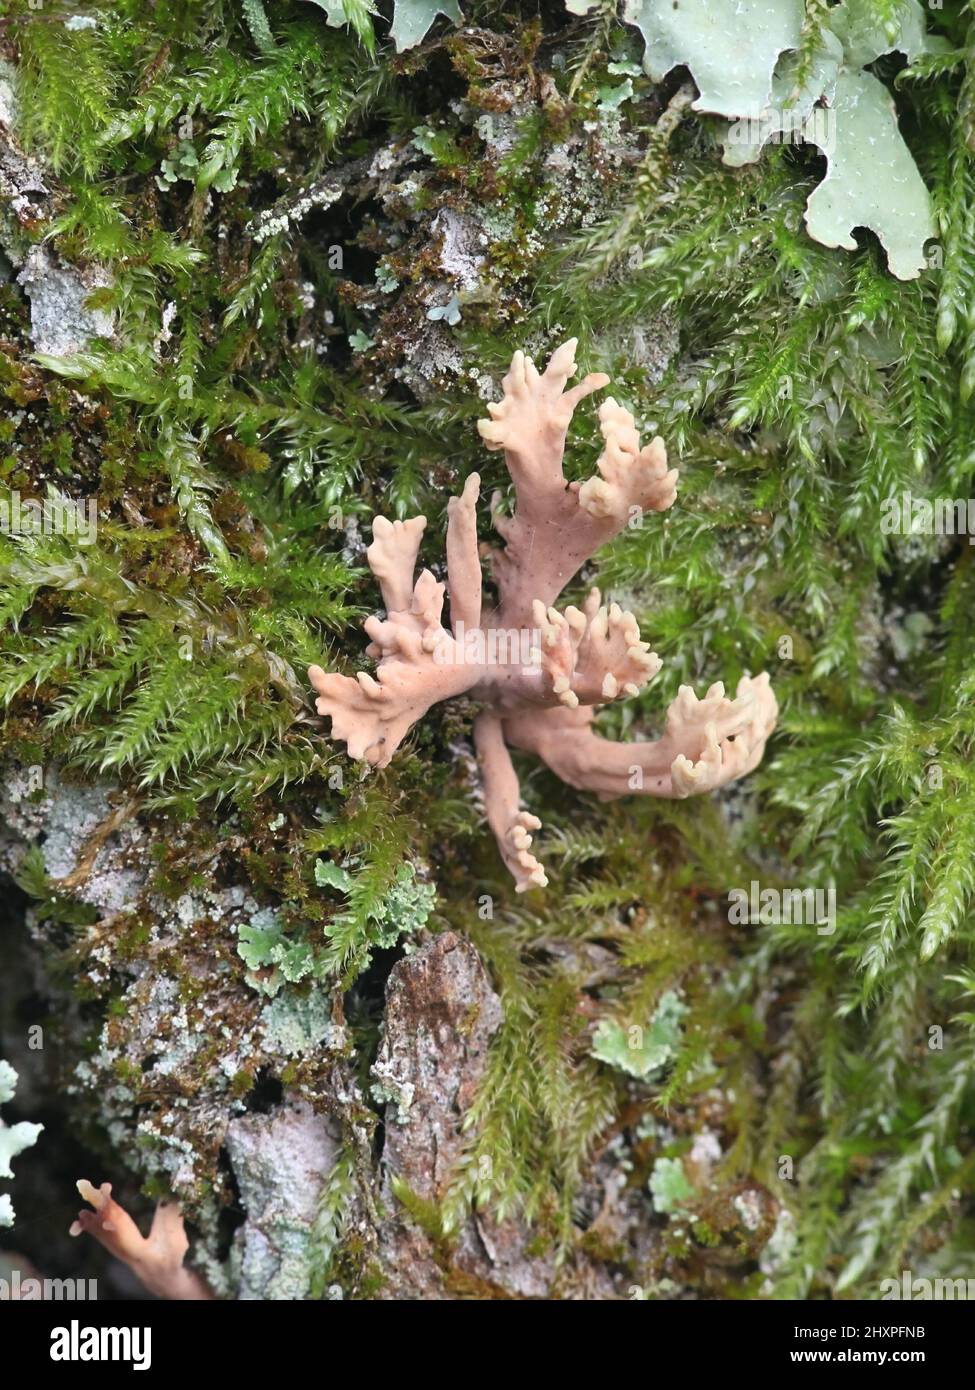 Lentaria byssiseda, a coral fungus from Finland growing on oak trunk, no common English name Stock Photo